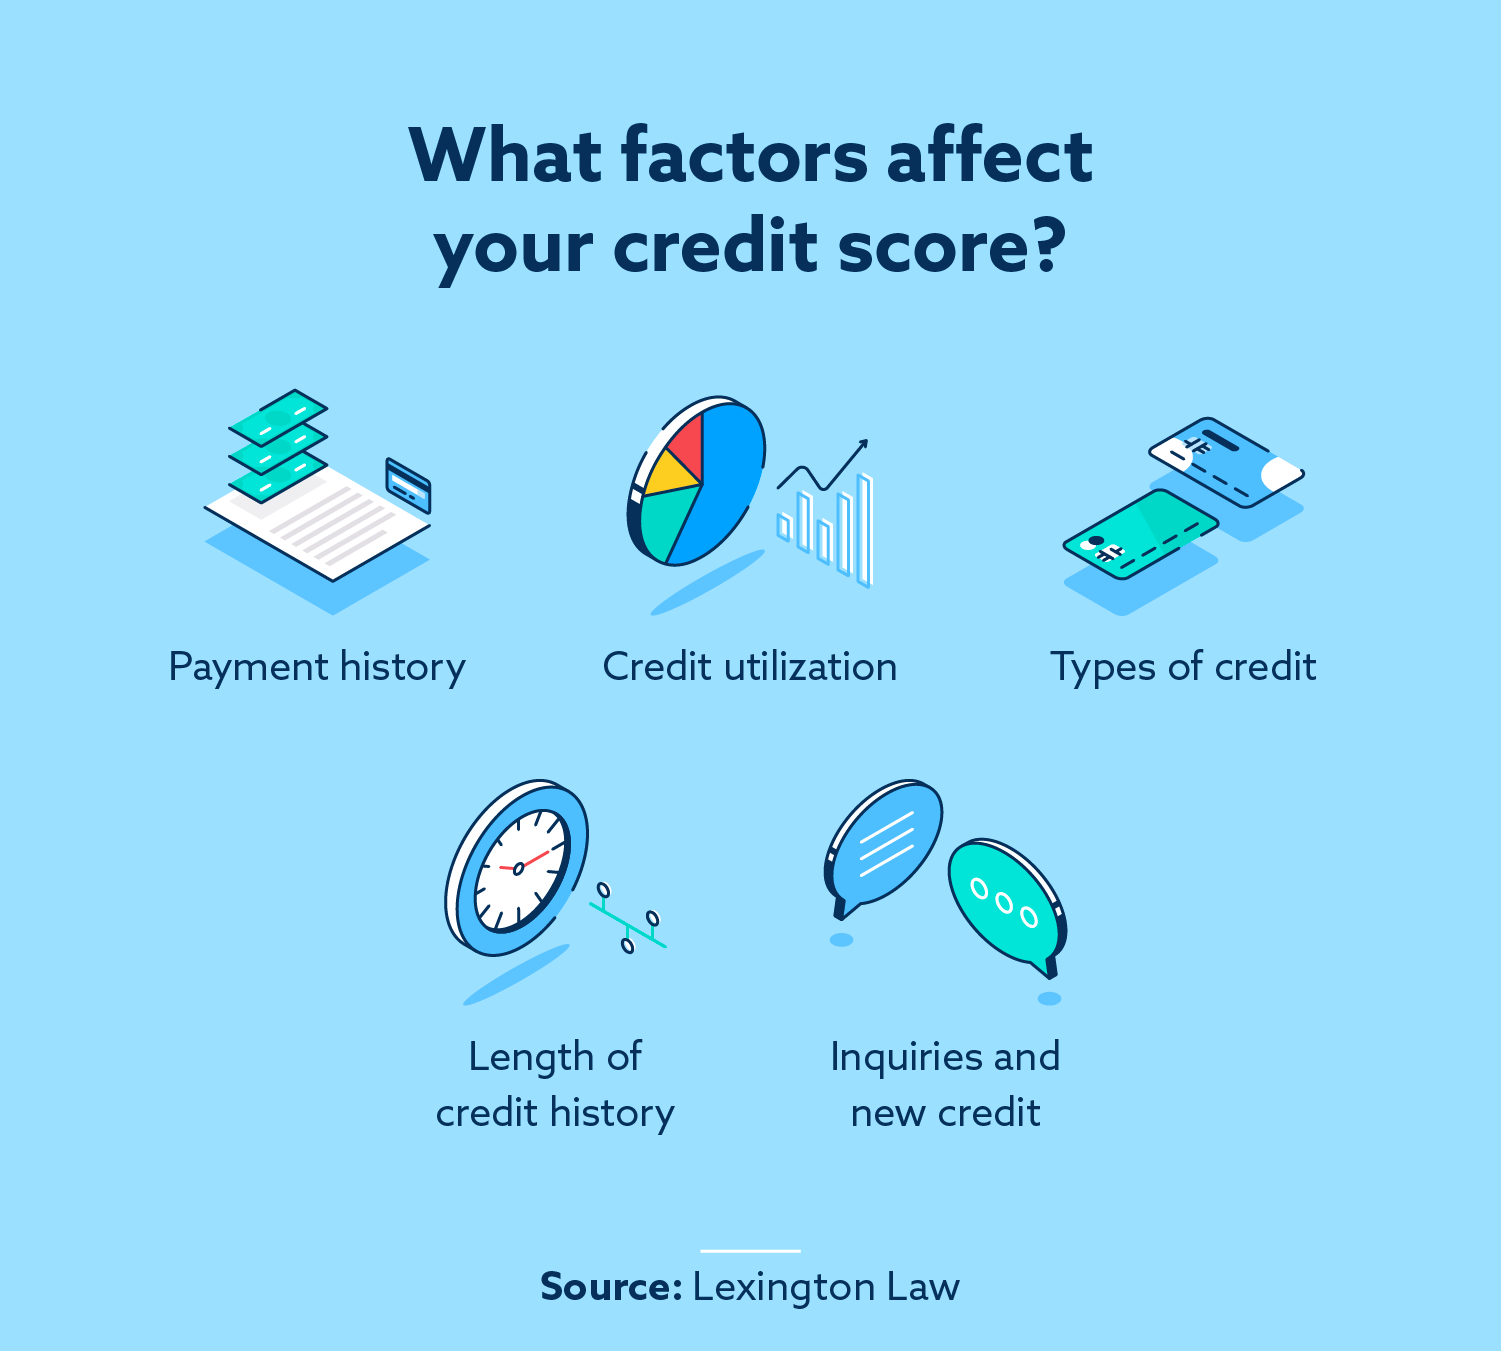 How long does it take to increase your credit score?